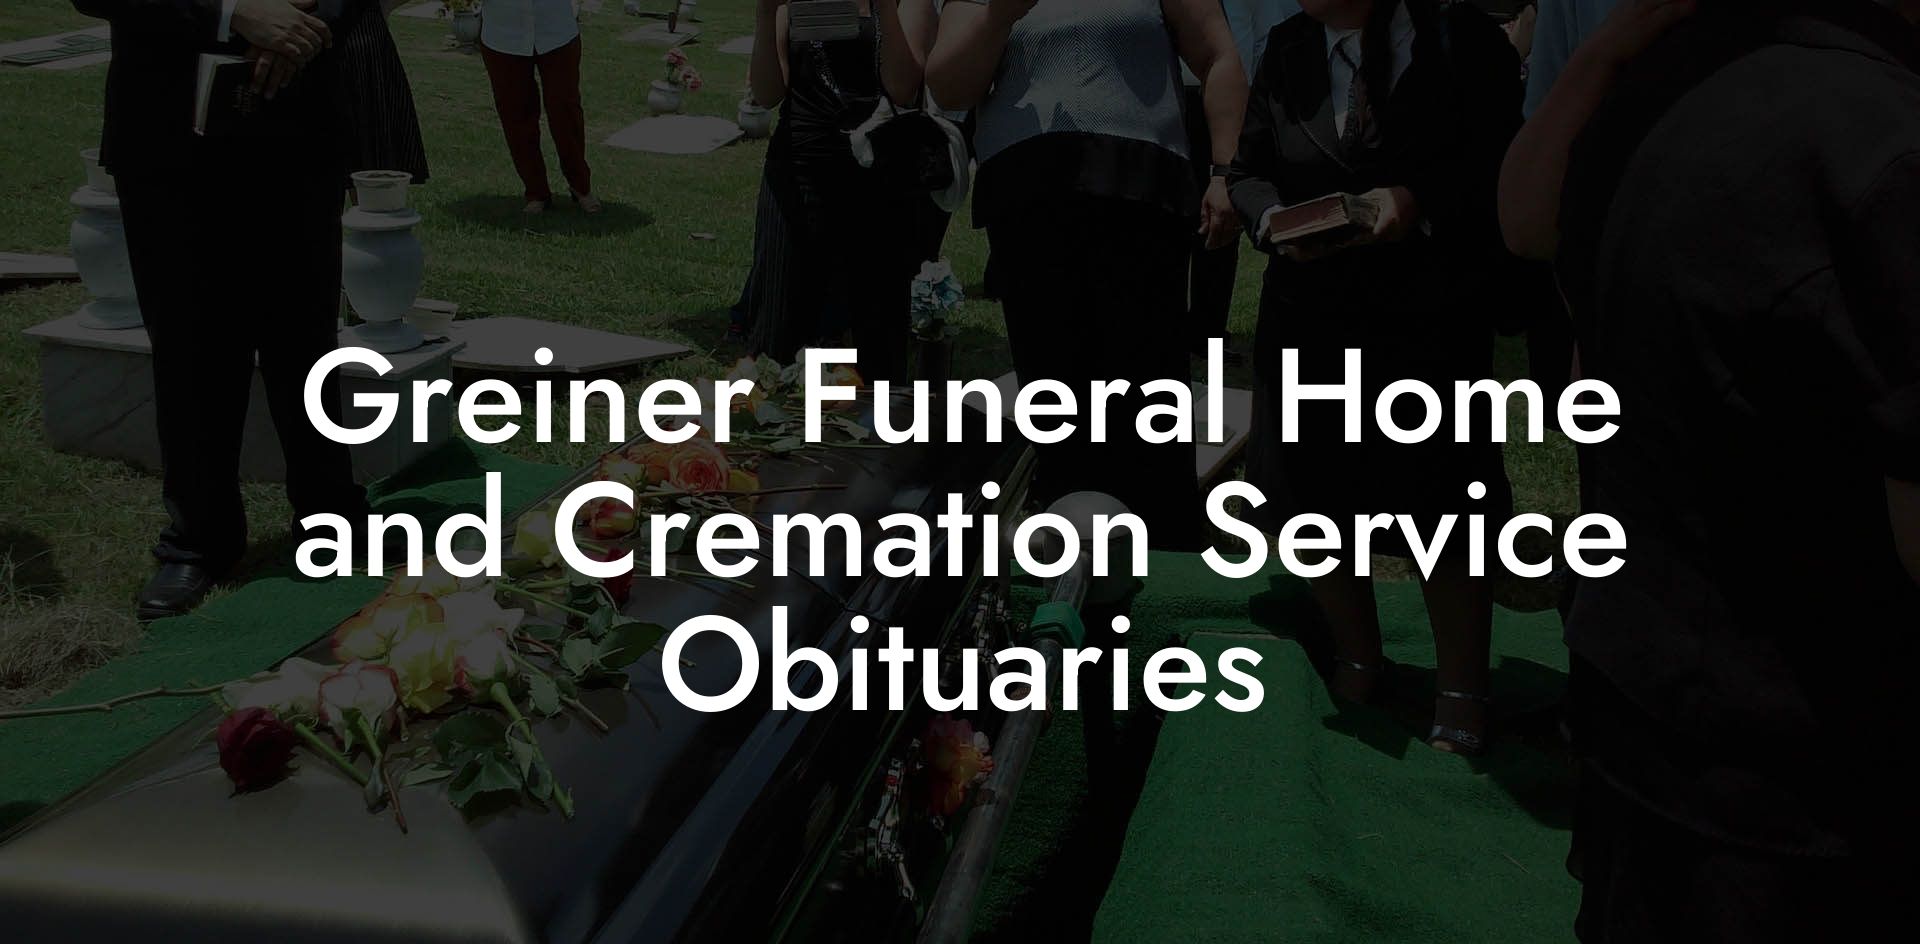 Greiner Funeral Home and Cremation Service Obituaries